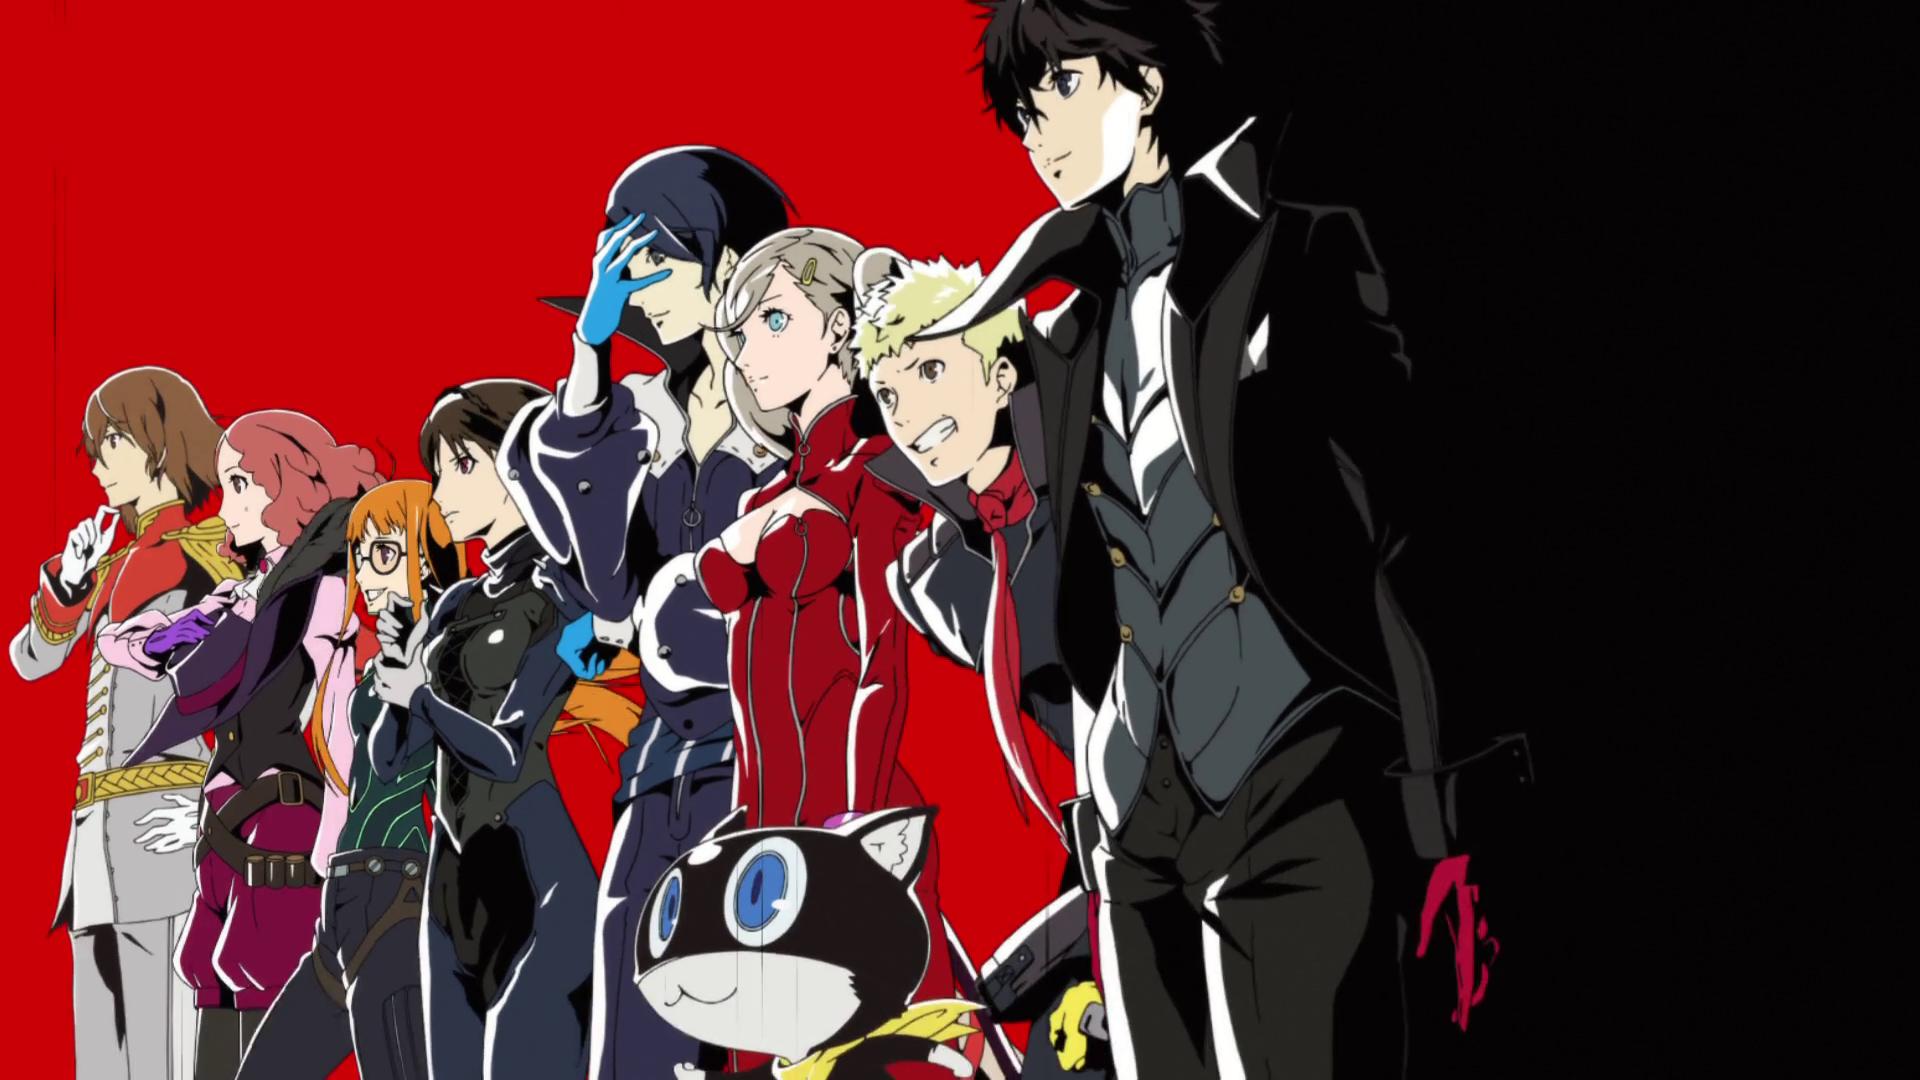 50 Persona 5 Royal HD Wallpapers and Backgrounds